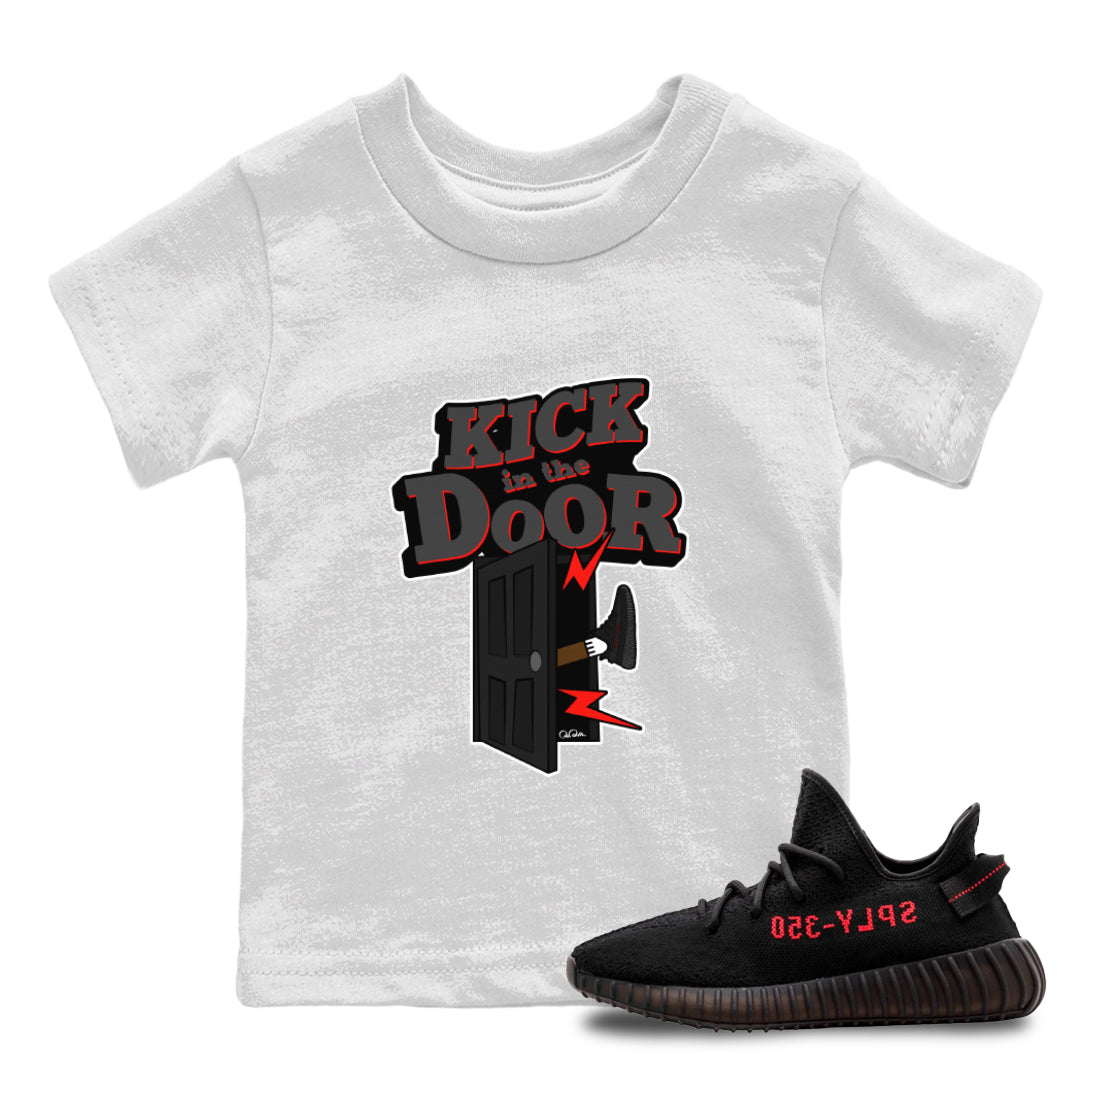 Yeezy 350 Bred shirt to match jordans Kick In The Door sneaker tees Adidas Yeezy Boost V2 350 Bred SNRT Sneaker Release Tees Baby Toddler White 1 T-Shirt